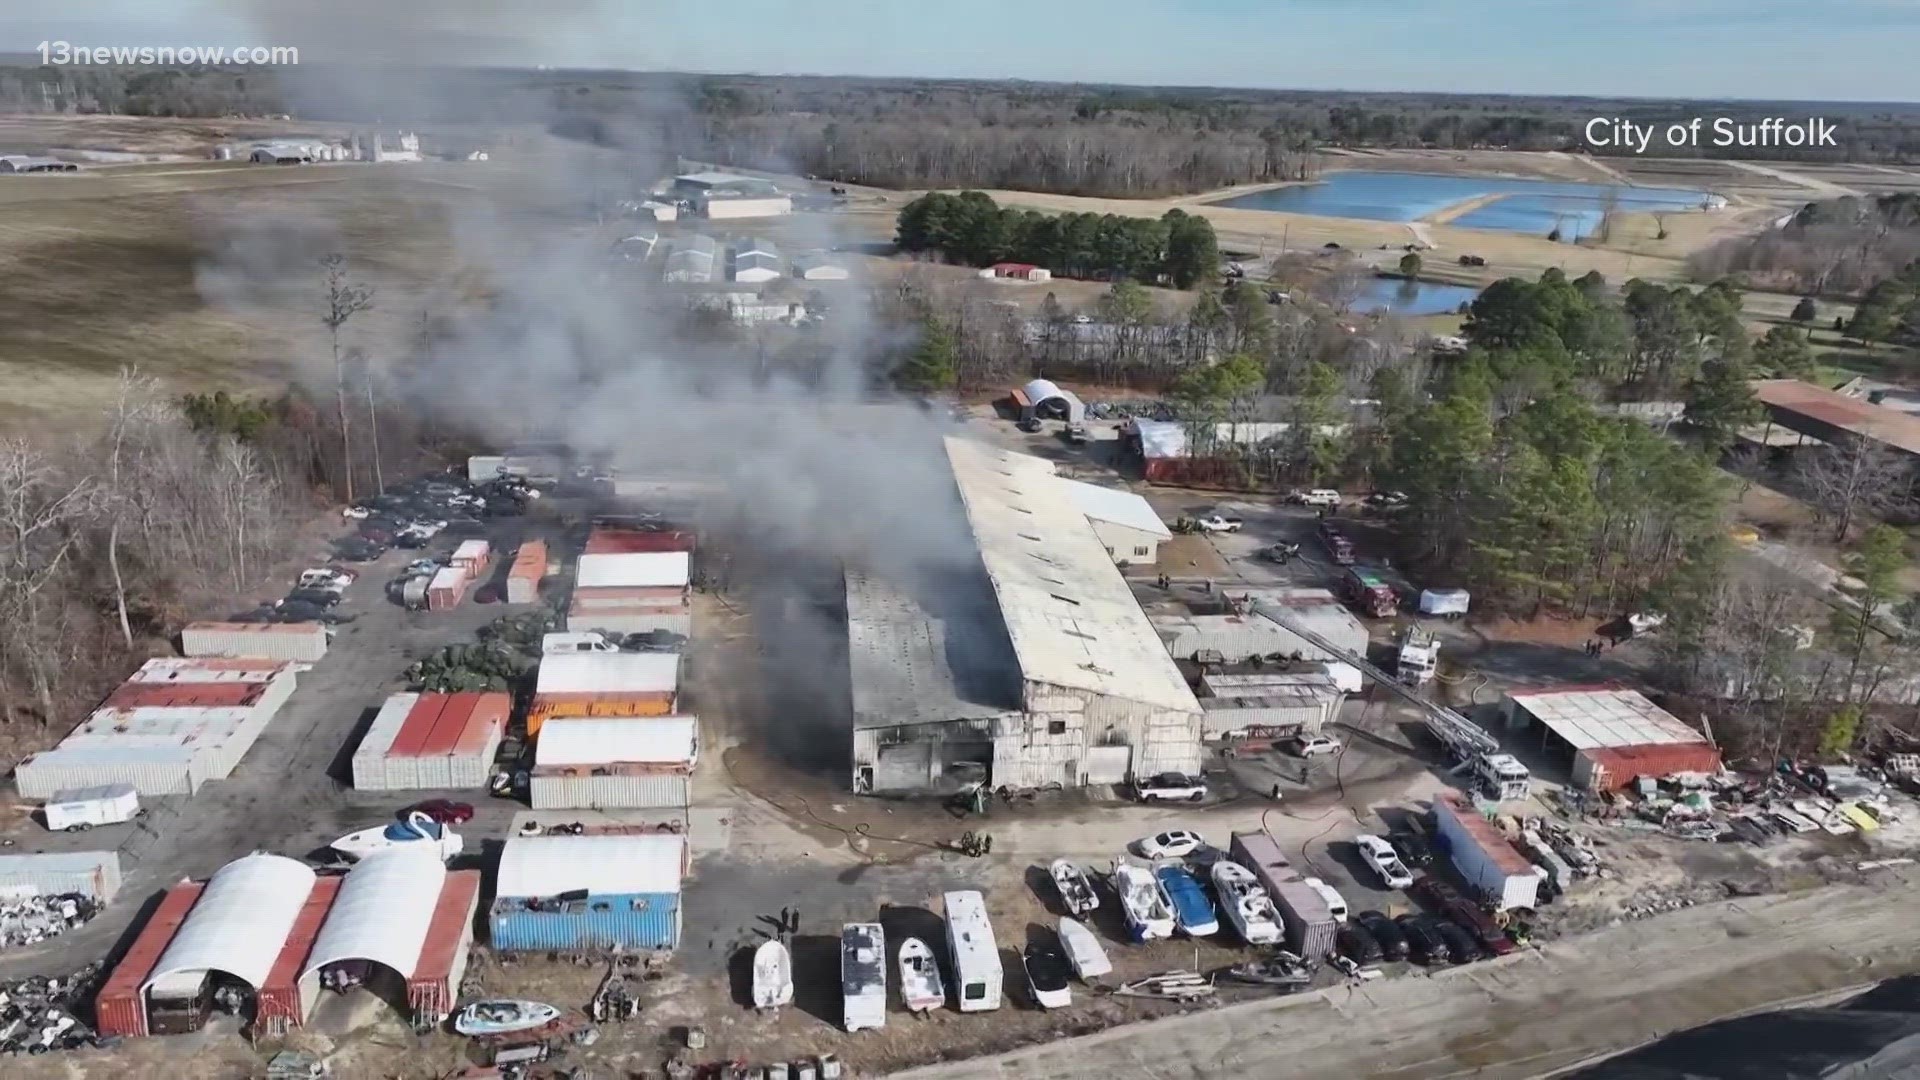 Isle Of Wight County remains under a local emergency after a fire ripped through a warehouse with potentially hazardous materials inside.